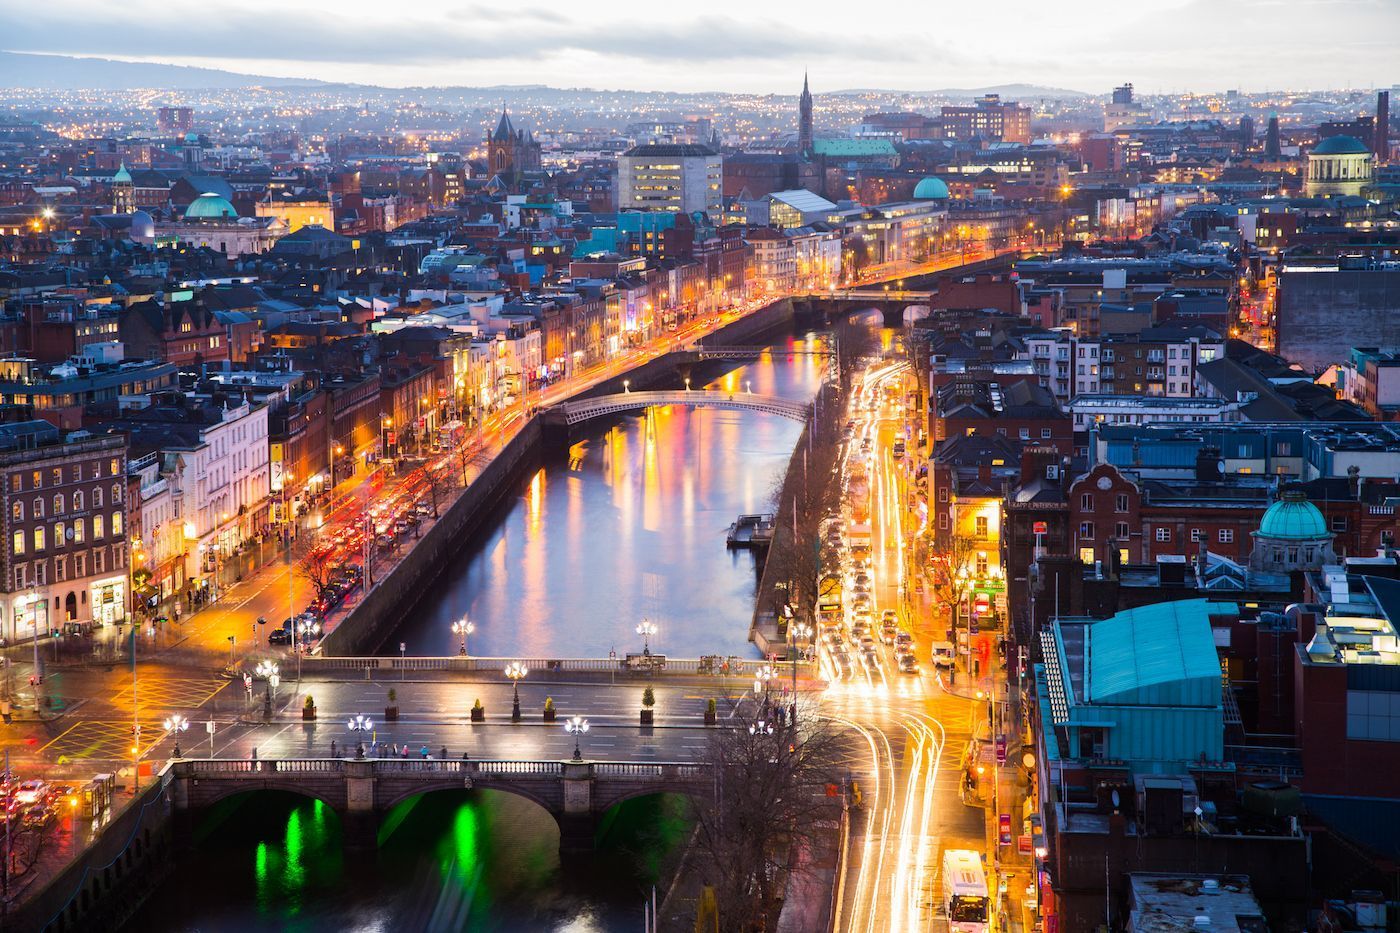 15-minute city plans could revolutionize several cities in Ireland